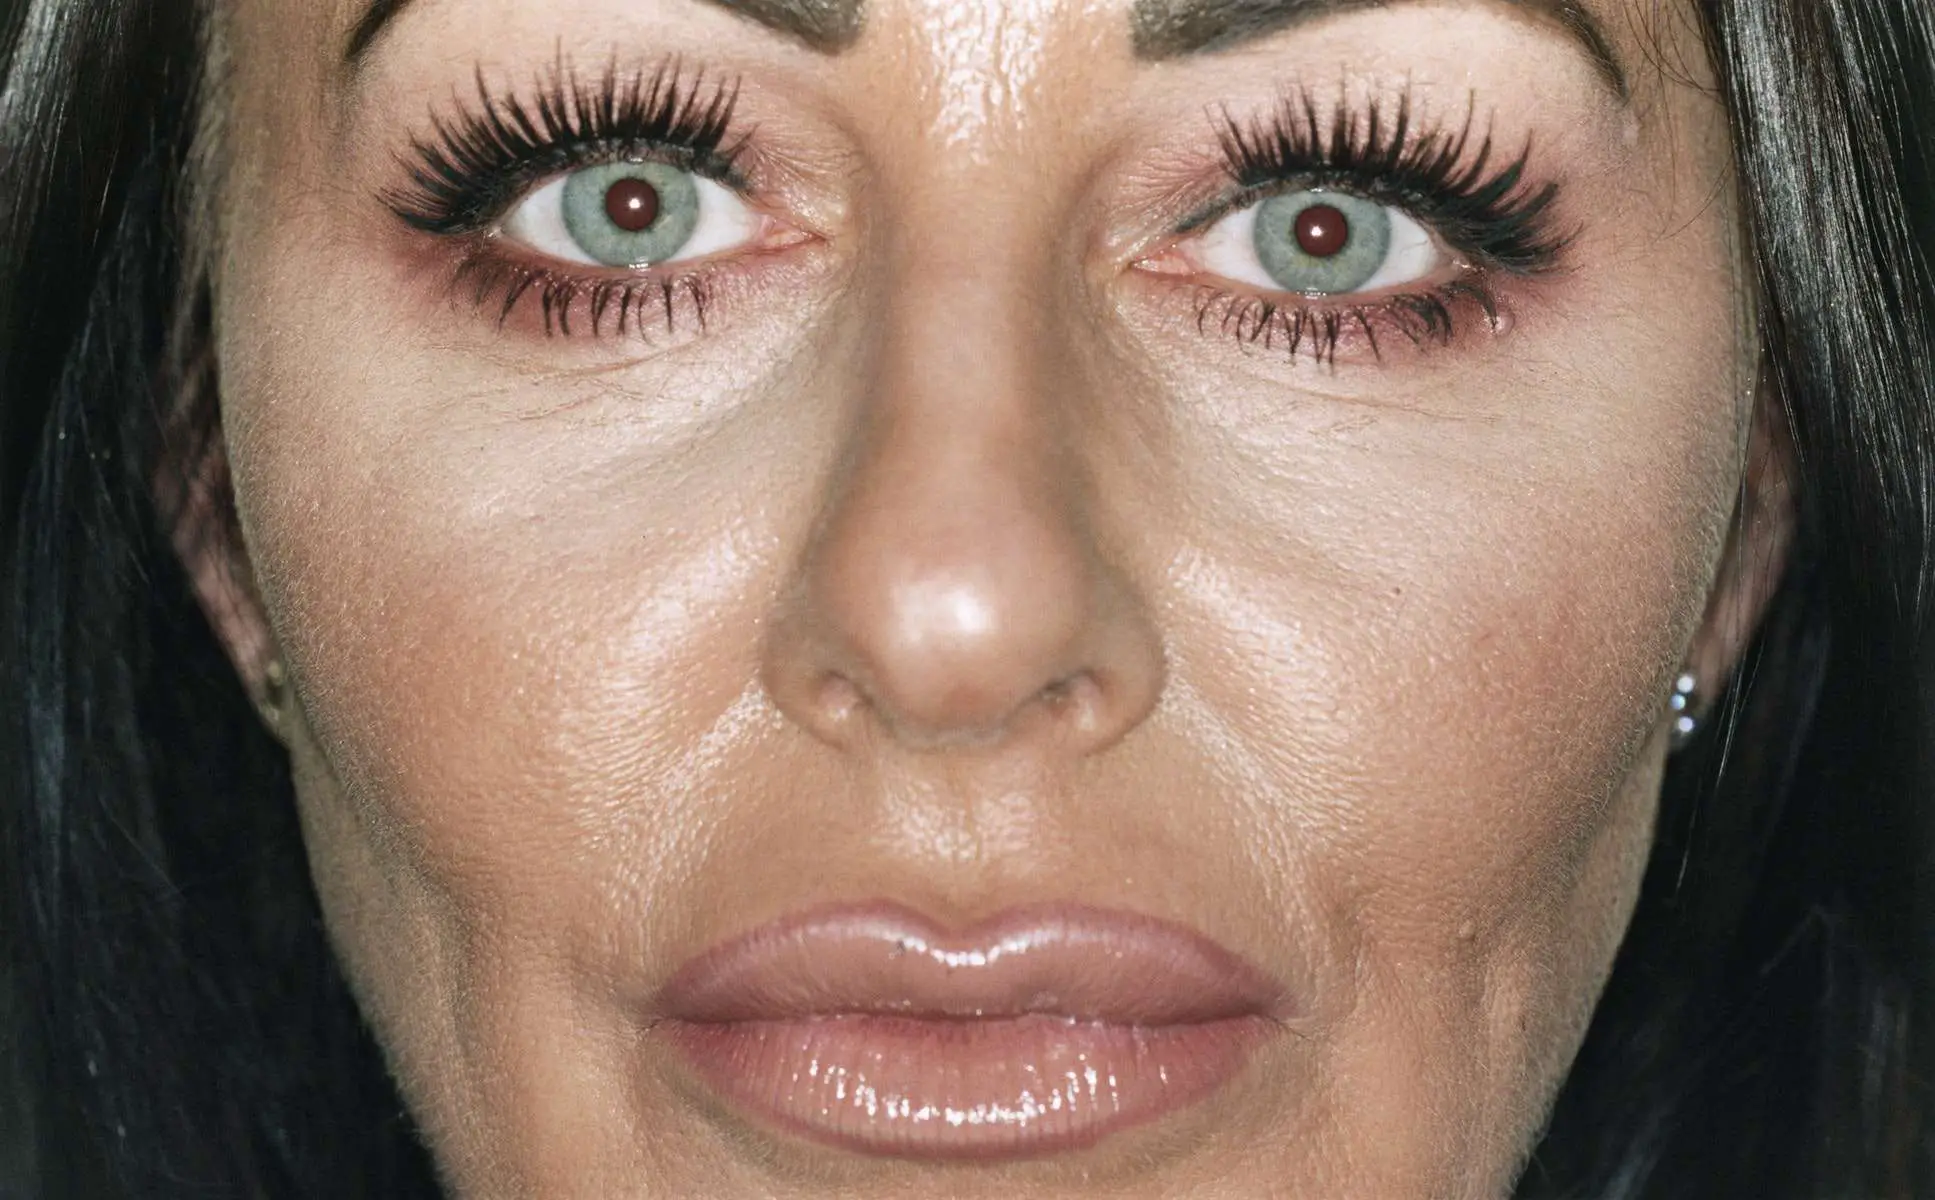 This is what 10 years of Botox looks like